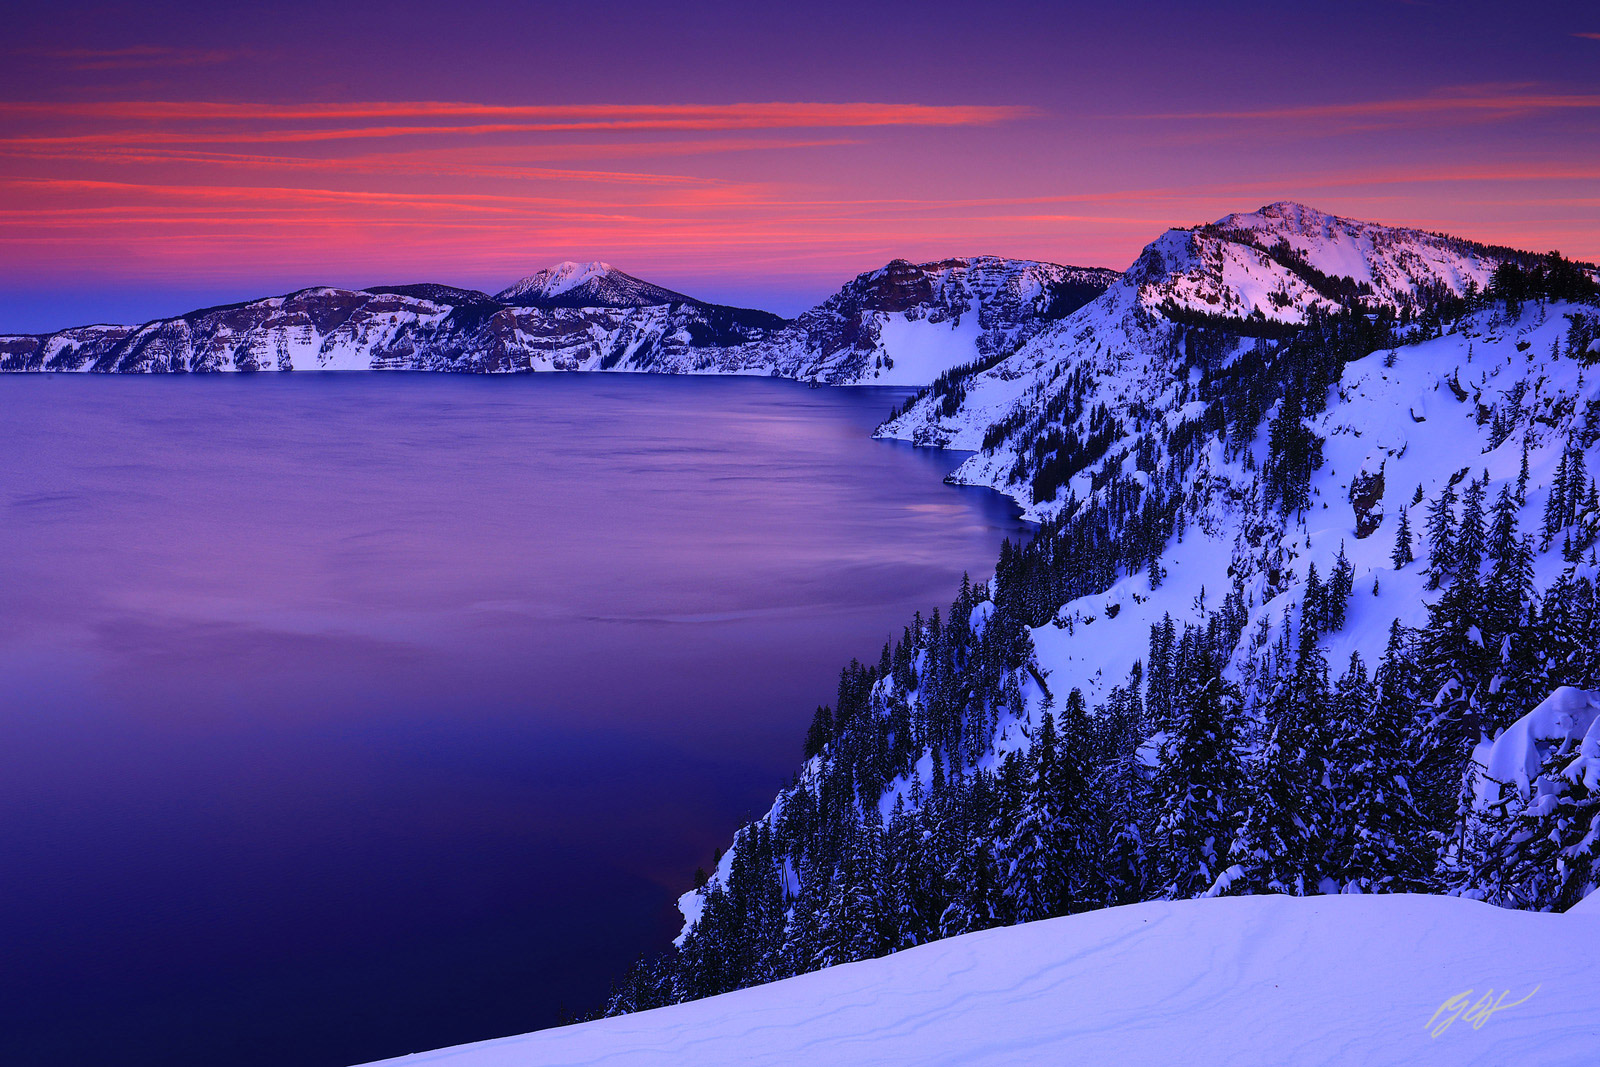 Winter Sunset Over Crater Lake, Crater Lake National Park in Oregon